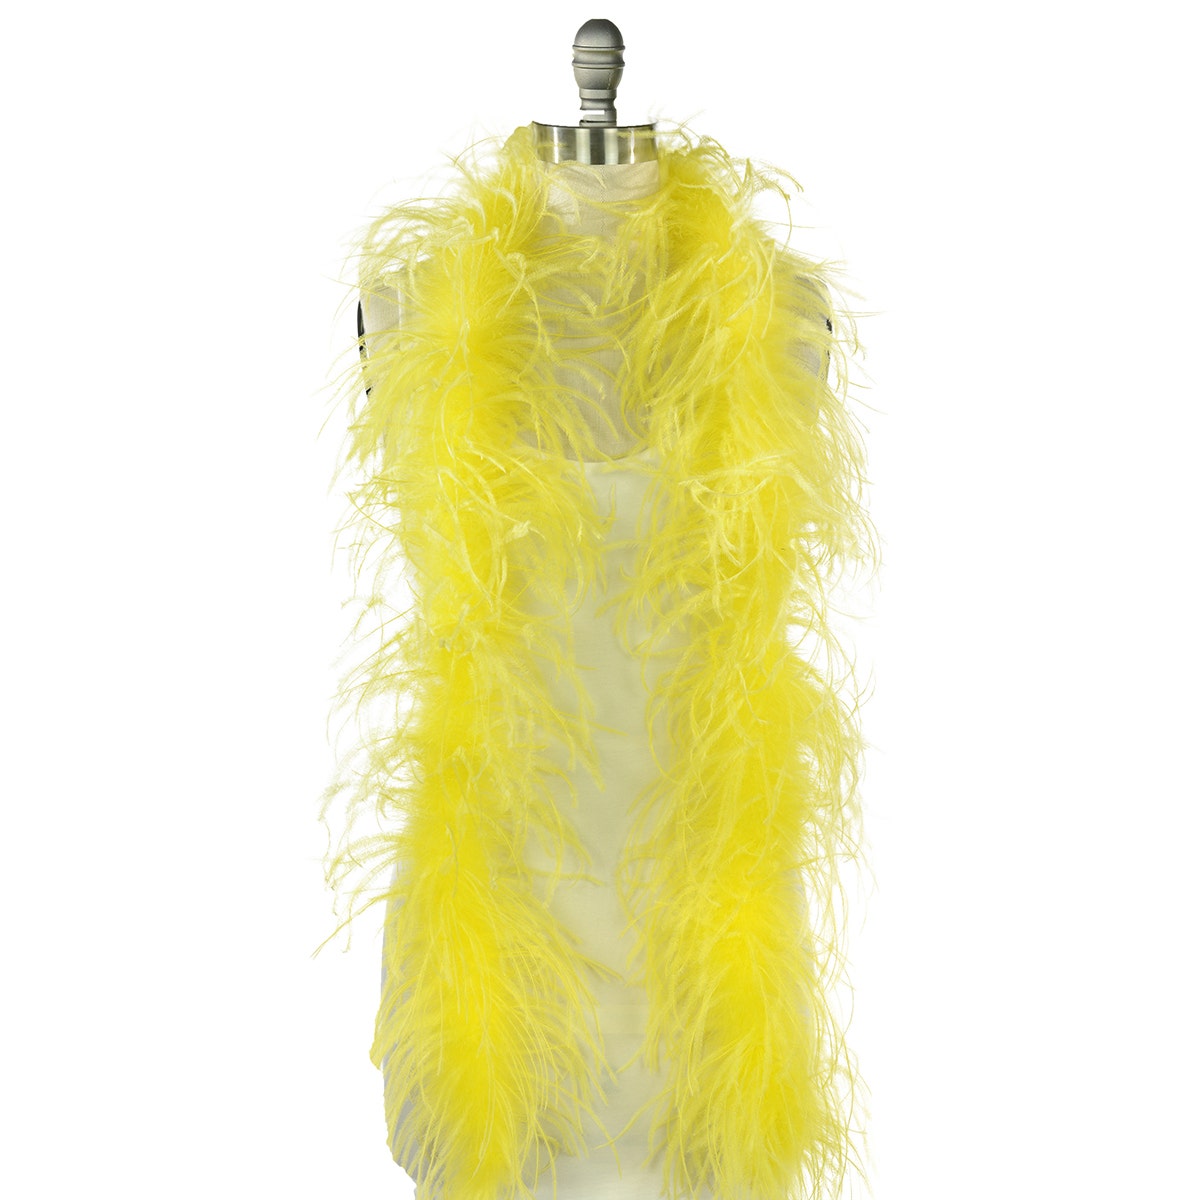 One Ply Ostrich Feather Boa - Lemon